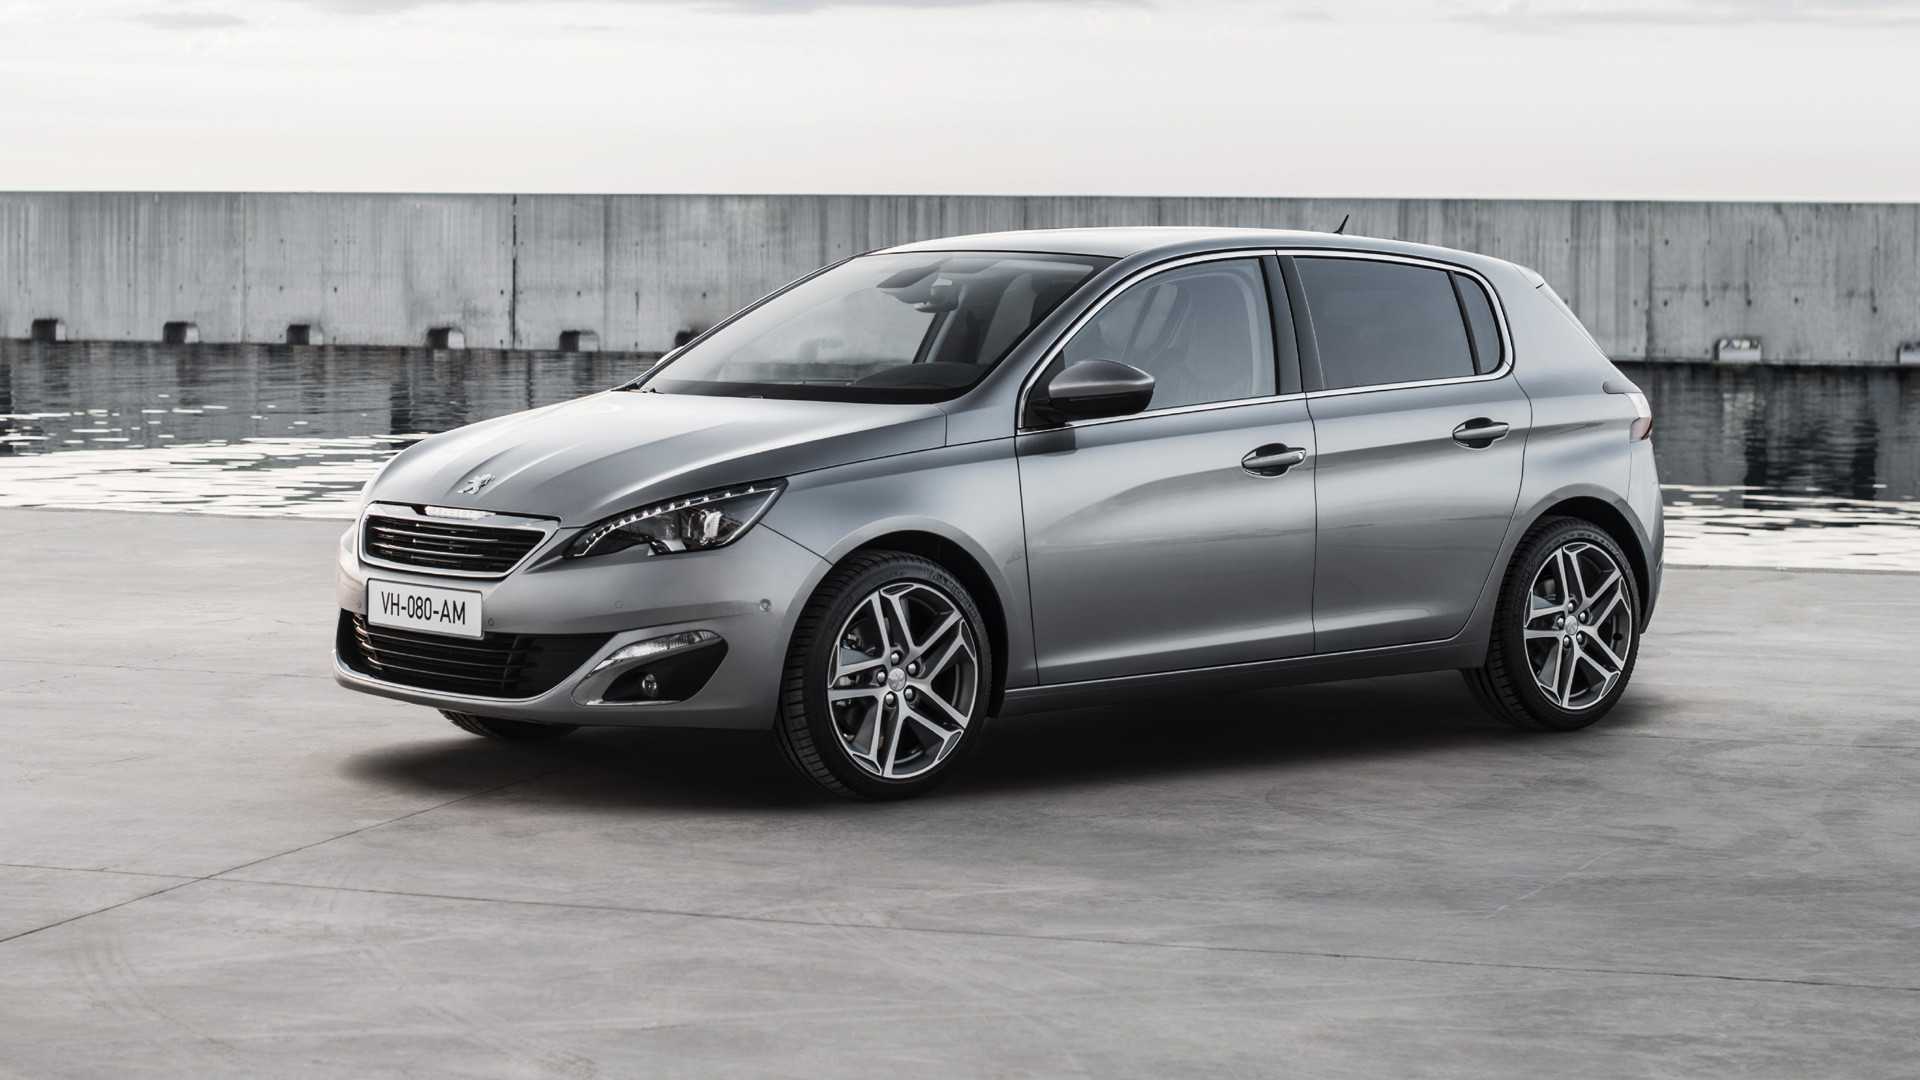 INTRODUCING THE NEW PEUGEOT 308